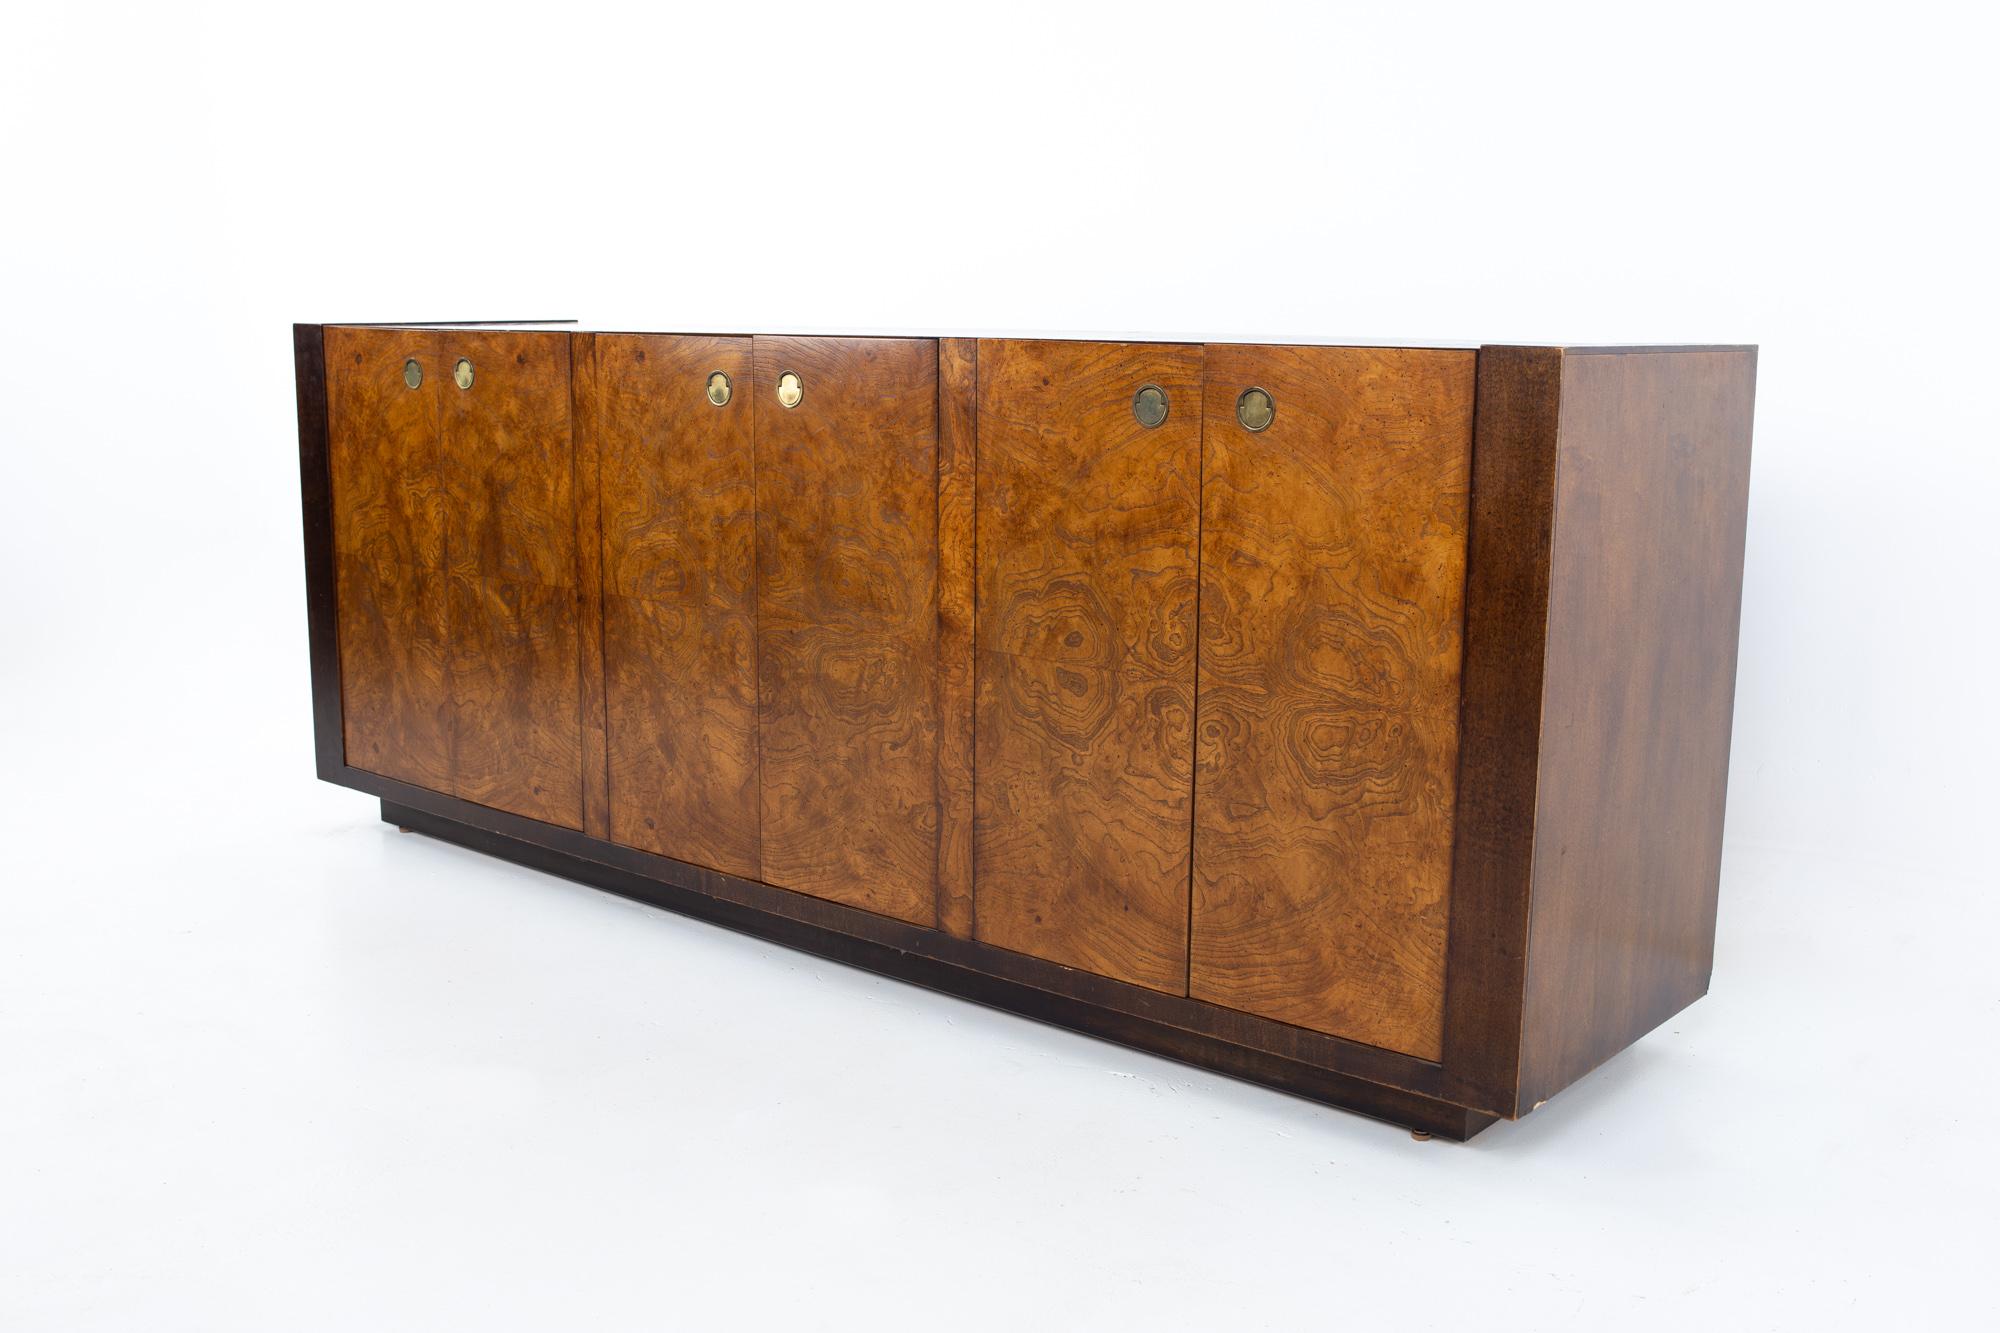 Milo Baughman style century furniture mid century burlwood sideboard buffet credenza.
Credenza measures: 76 wide x 18 deep x 29 inches high

All pieces of furniture can be had in what we call restored vintage condition. That means the piece is